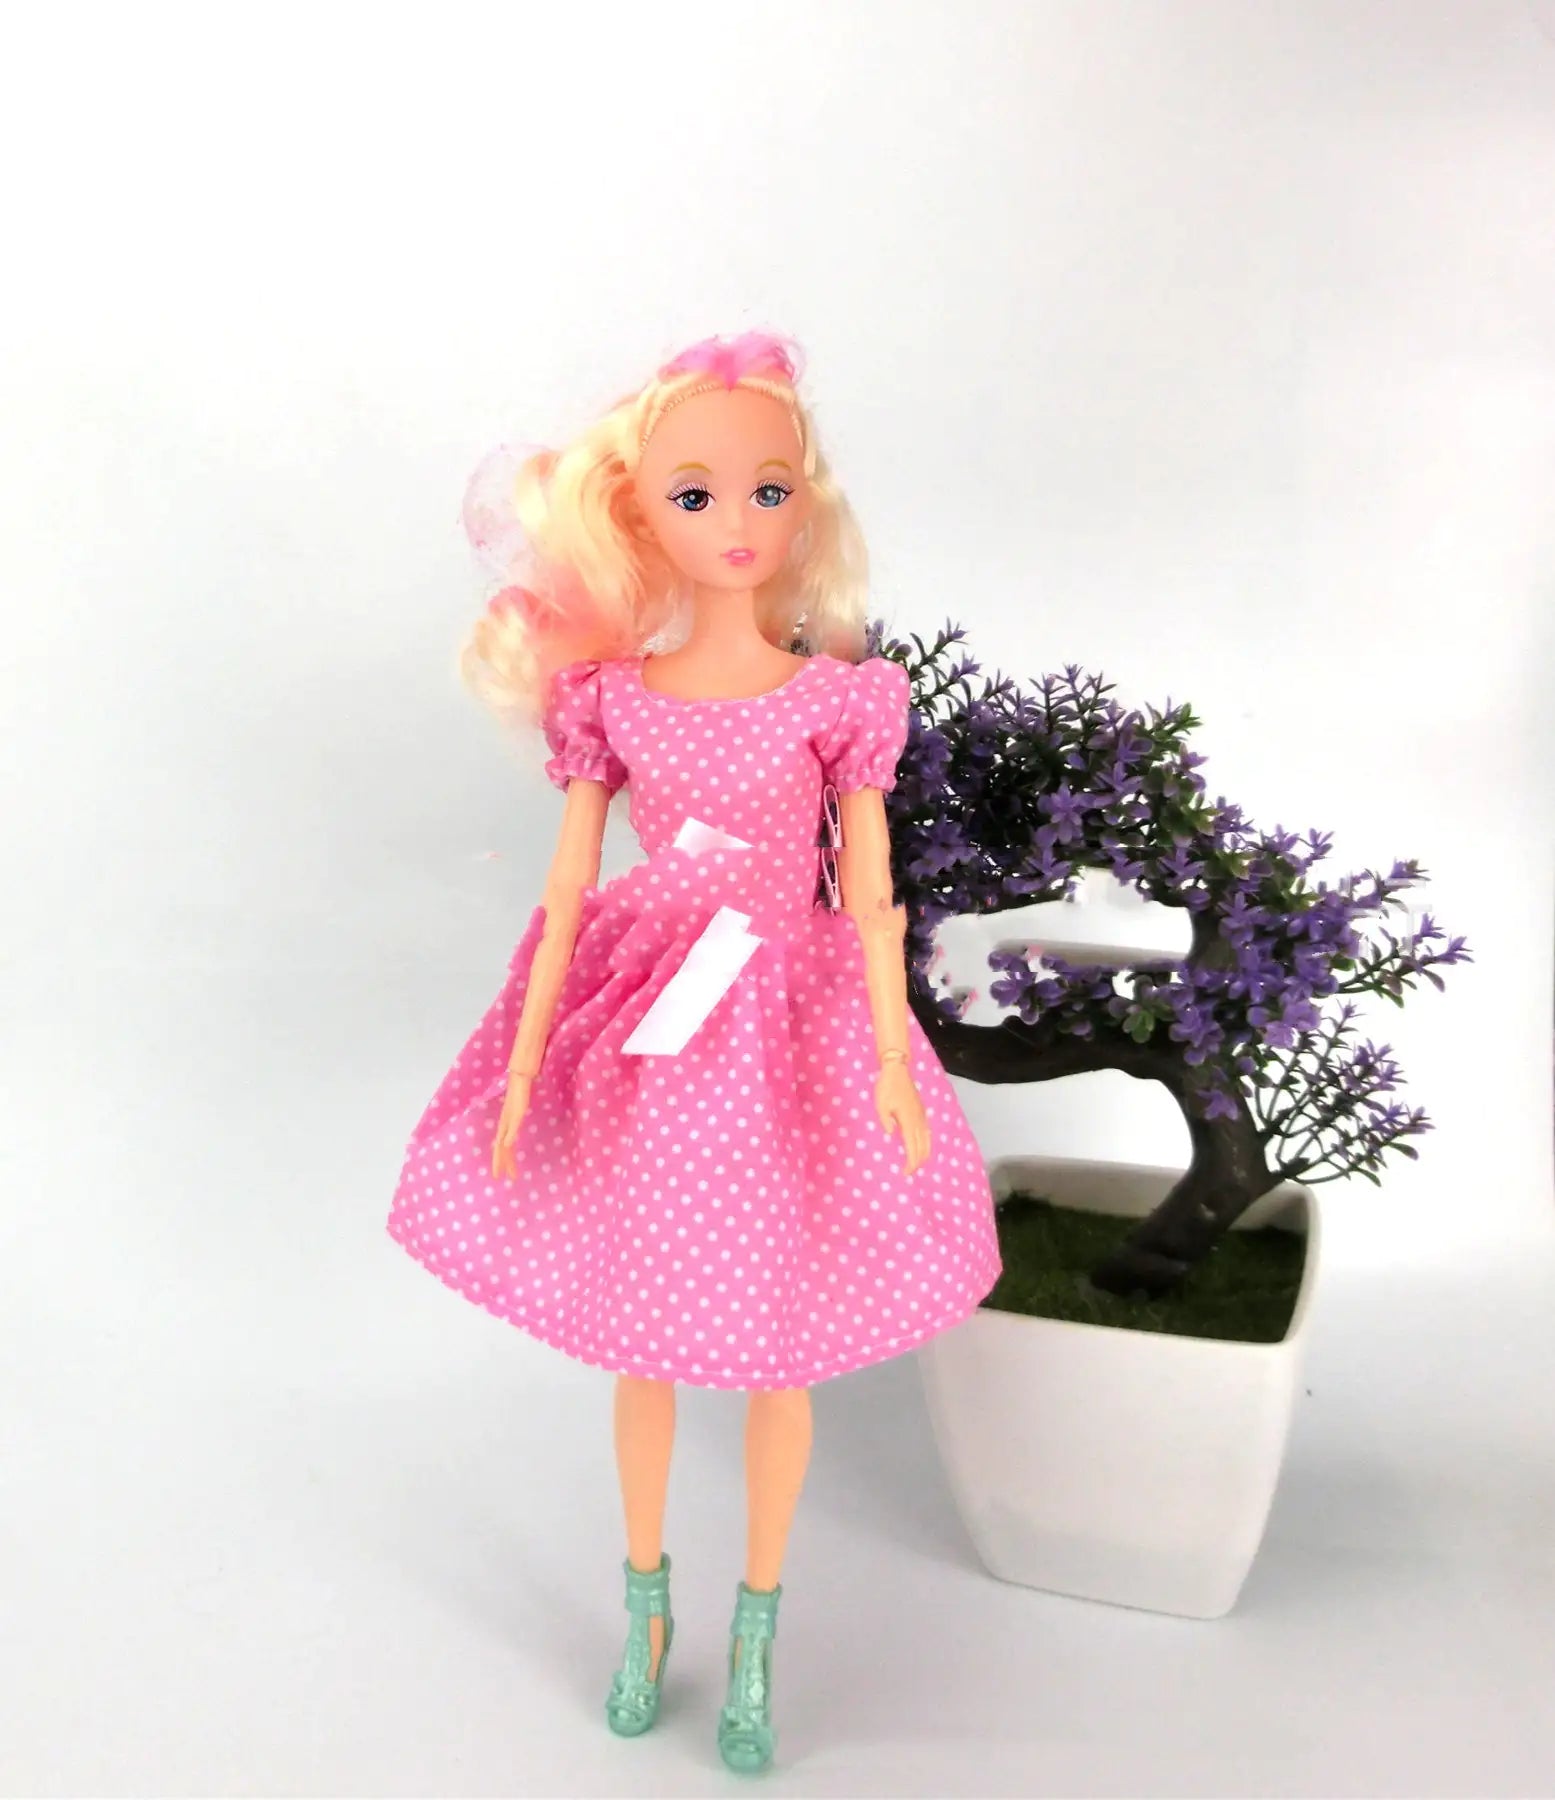 11 Inch Dress Up Doll Pink Dress One size